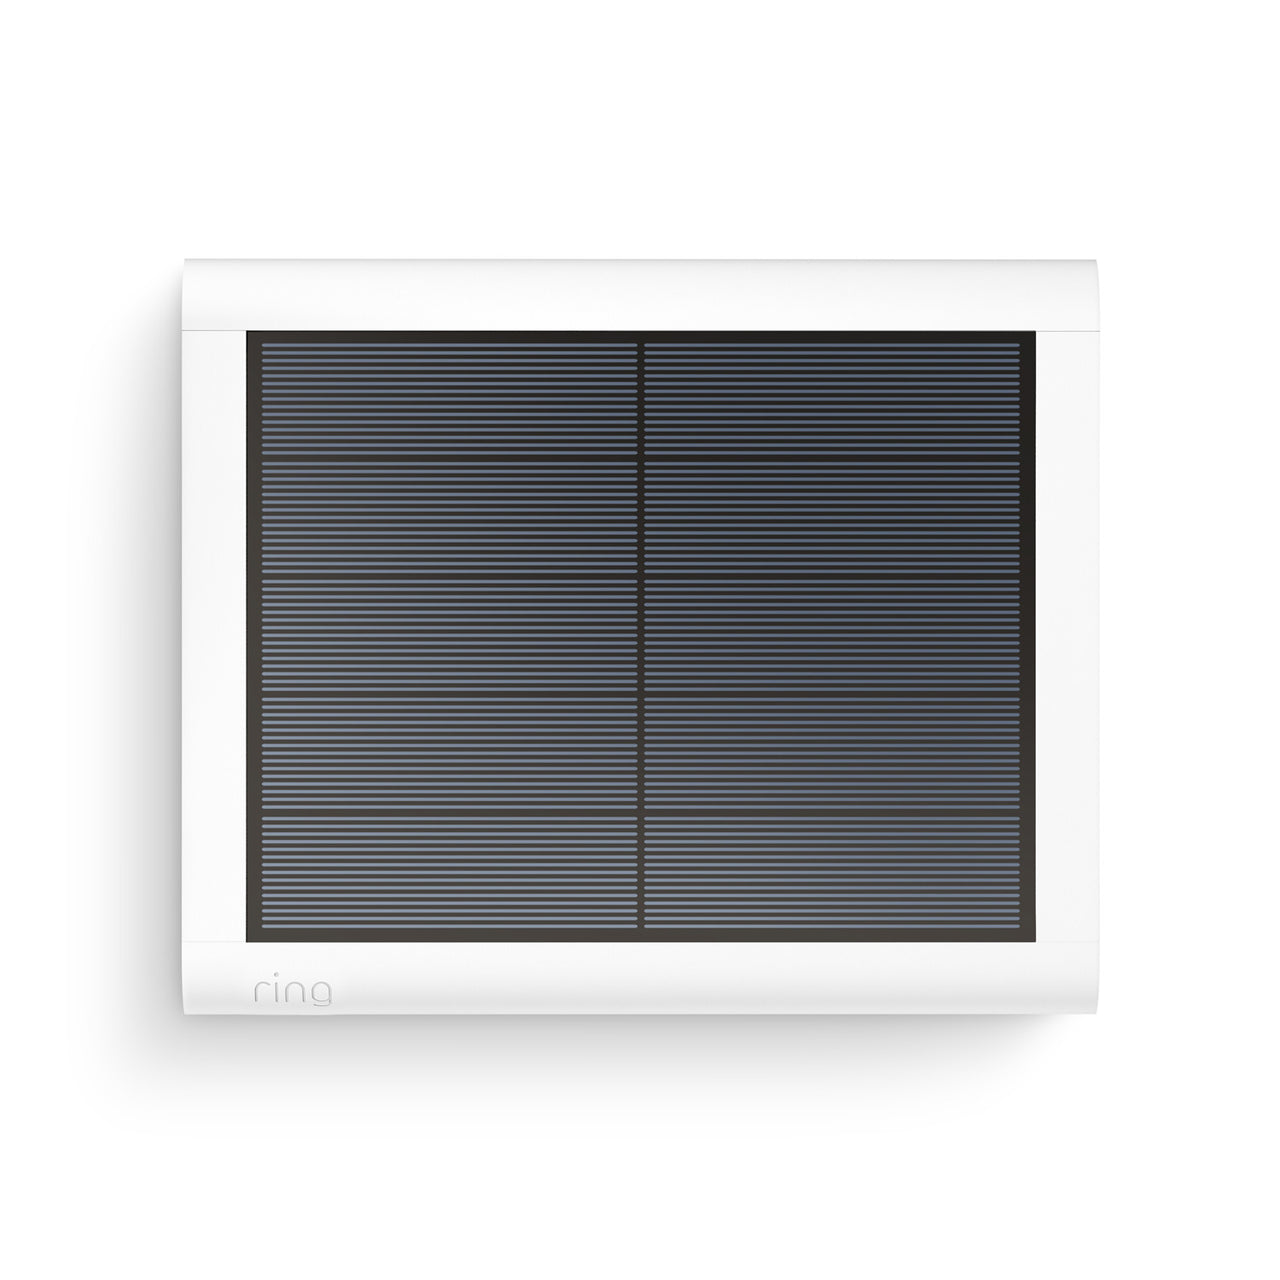 products/ring_solarpanelgen2_wht_front_wall_1500x1500_a8726442-1600-4662-98a4-b9a04f908028.jpg